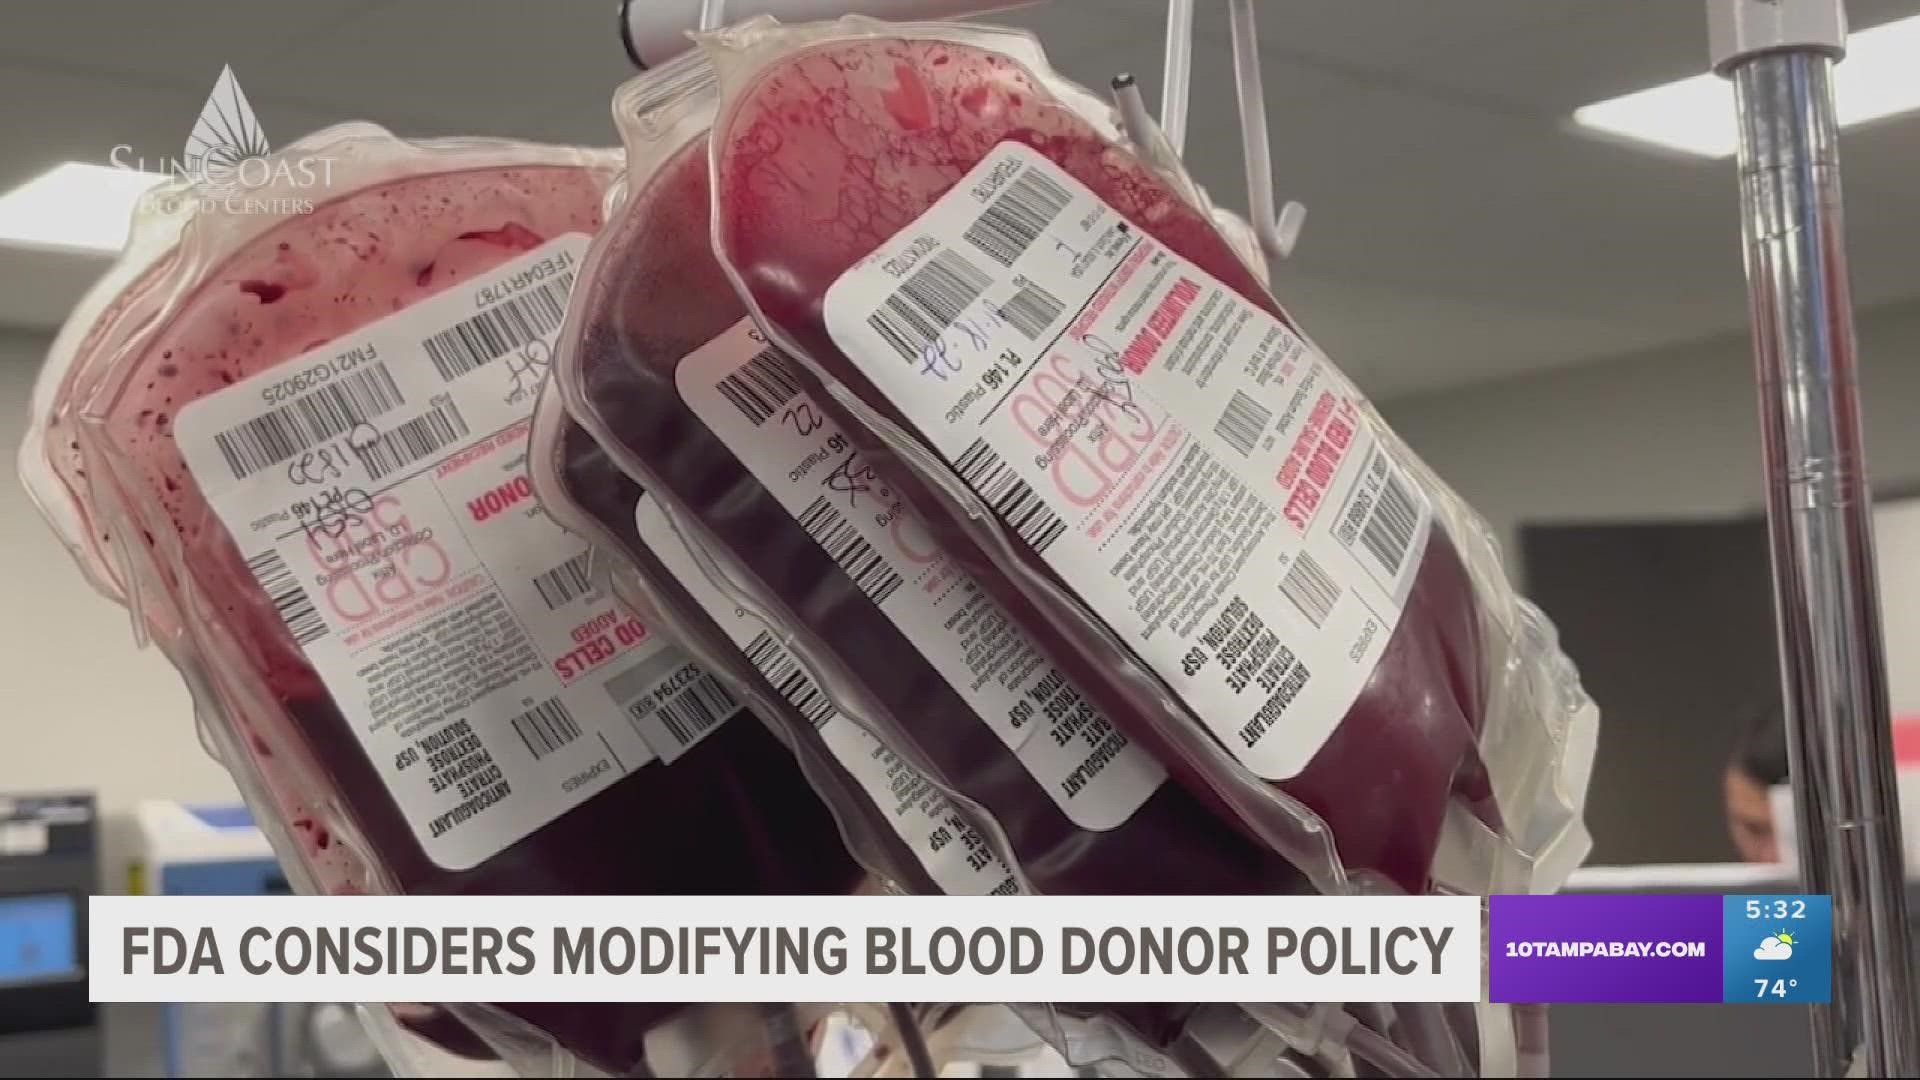 Data from a recent study has prompted the FDA to reconsider current guidelines surrounding blood donation.